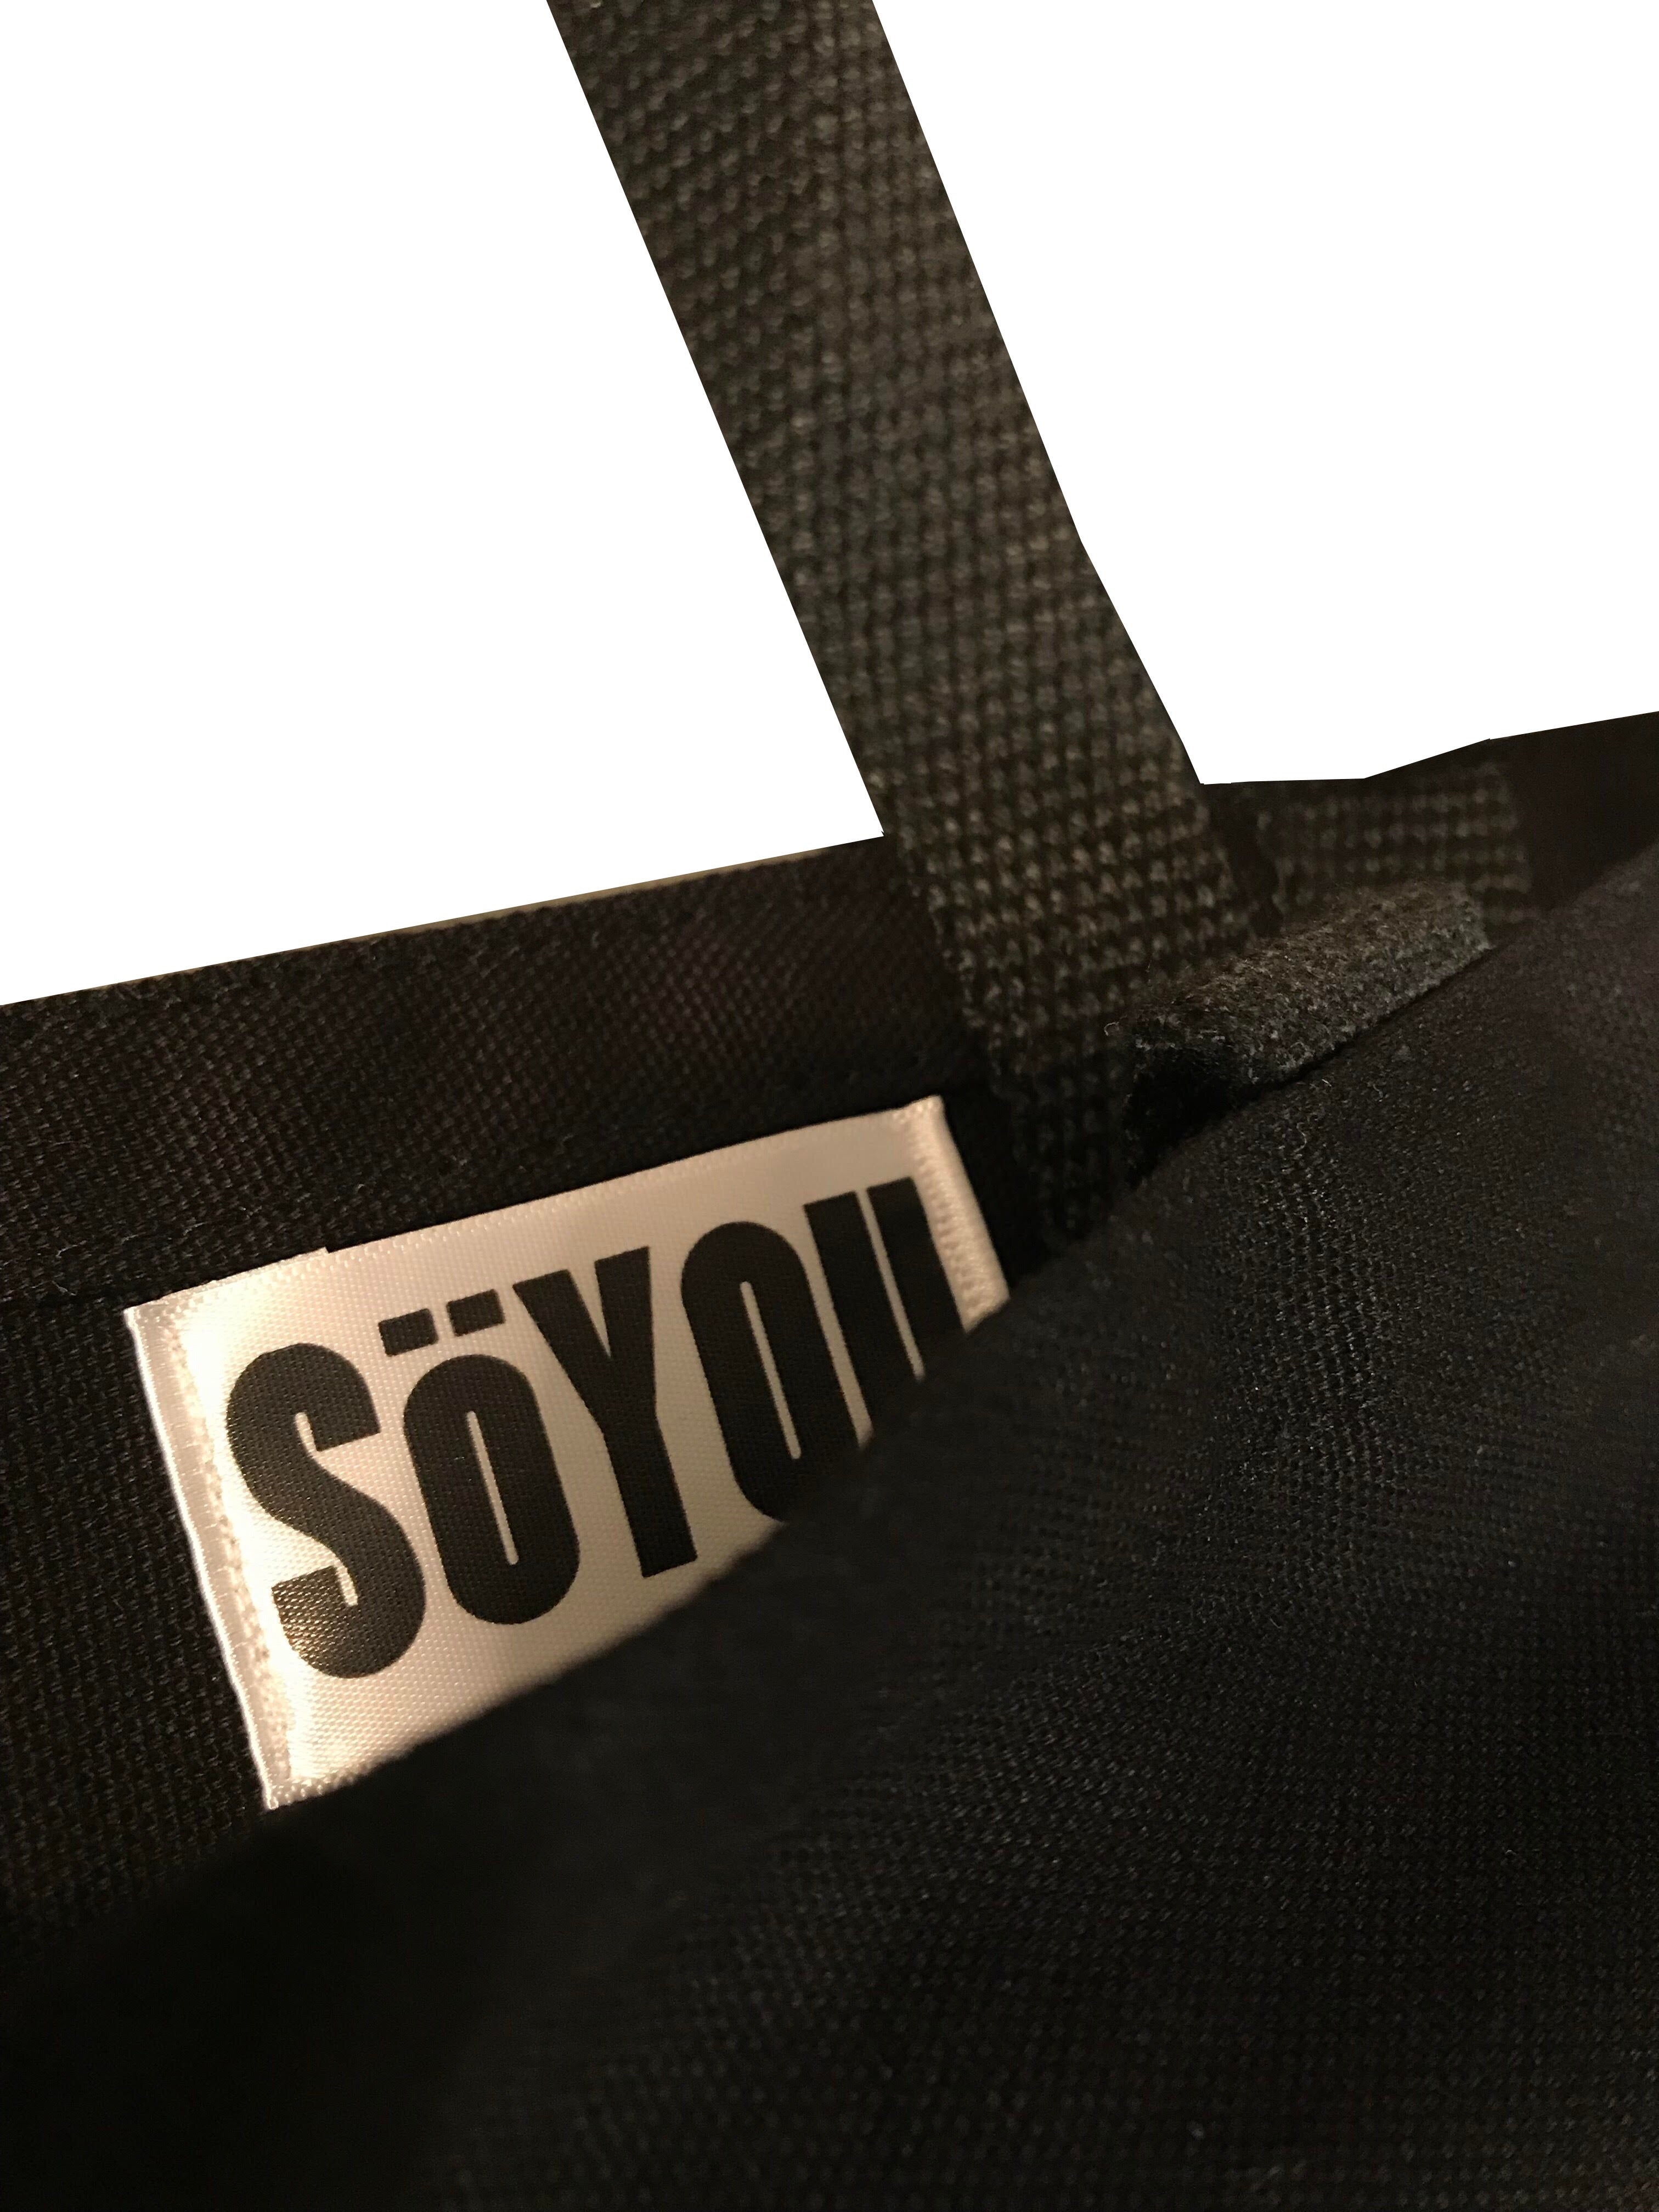 Delivery Boy Bag-SoYou Clothing